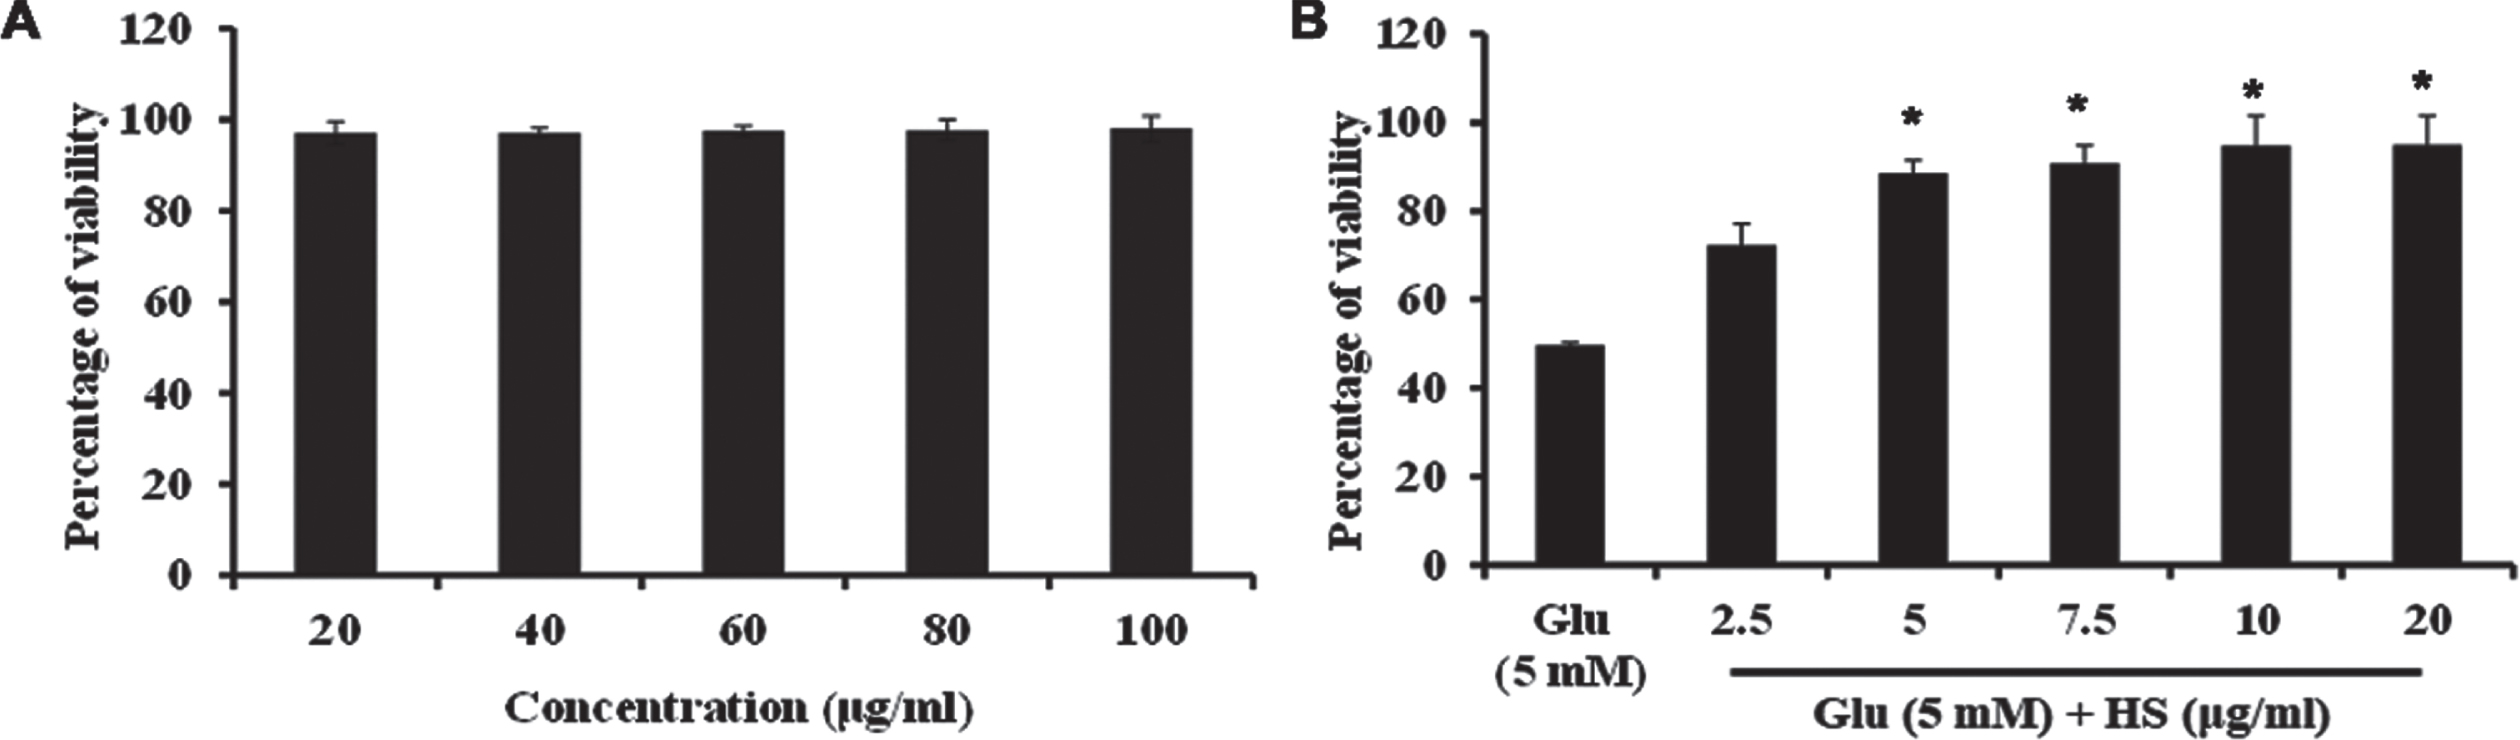 (A) Effect of varying concentrations of HS in HT-22 cells (B) Protective effect of HS on glutamate induced toxicity. (Significance at p < 0.05; * Glutamate vs HS treated; n = 3).